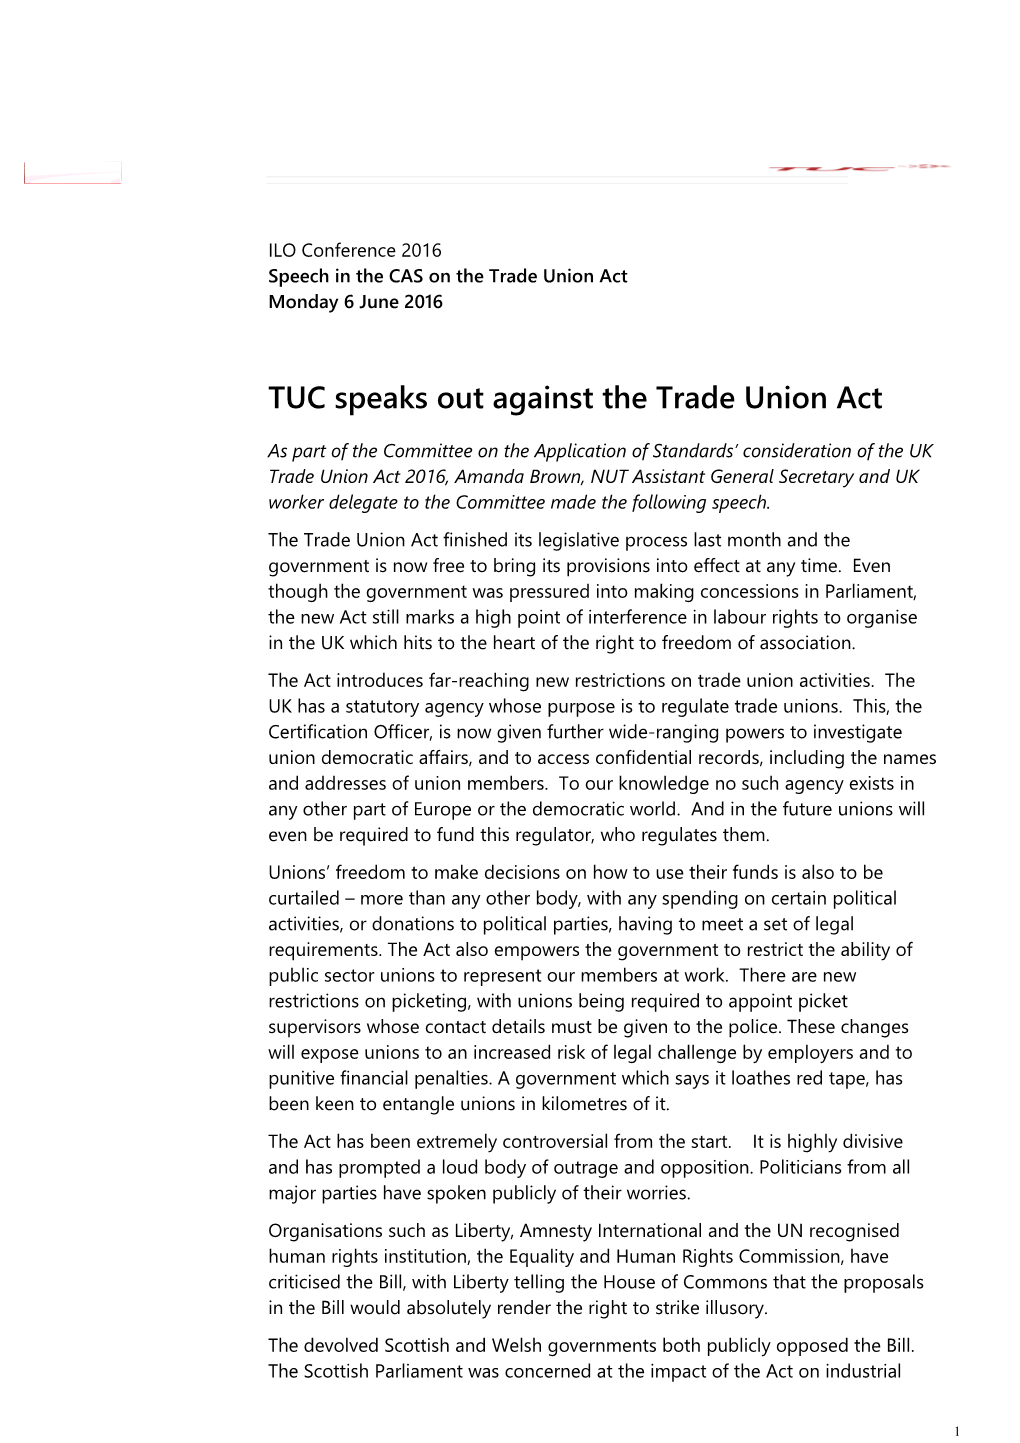 Speech in the CAS on the Trade Union Act